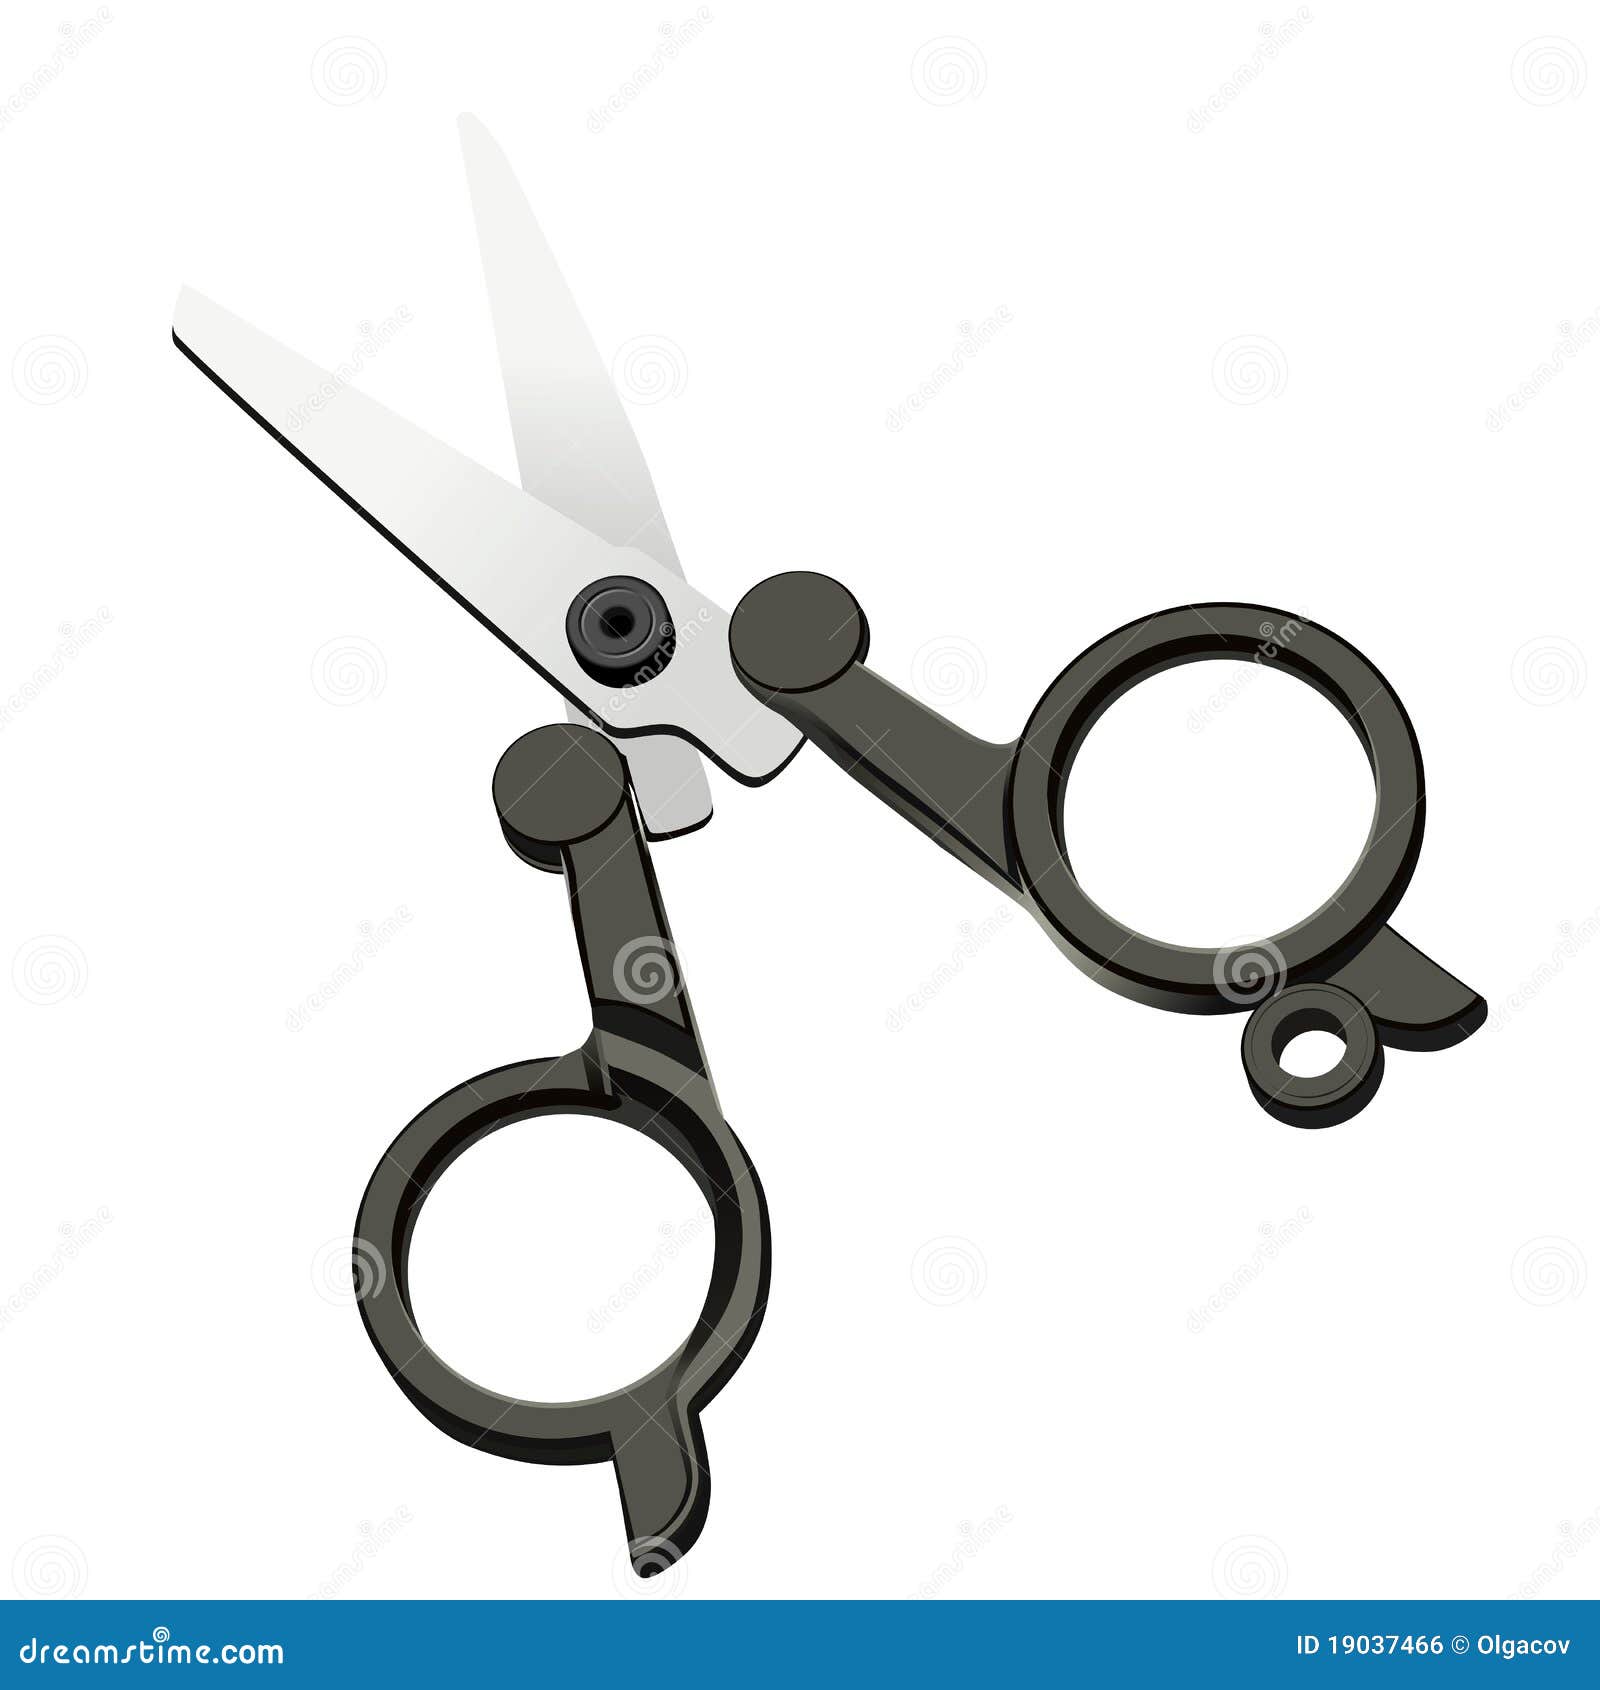  scissors on a white background